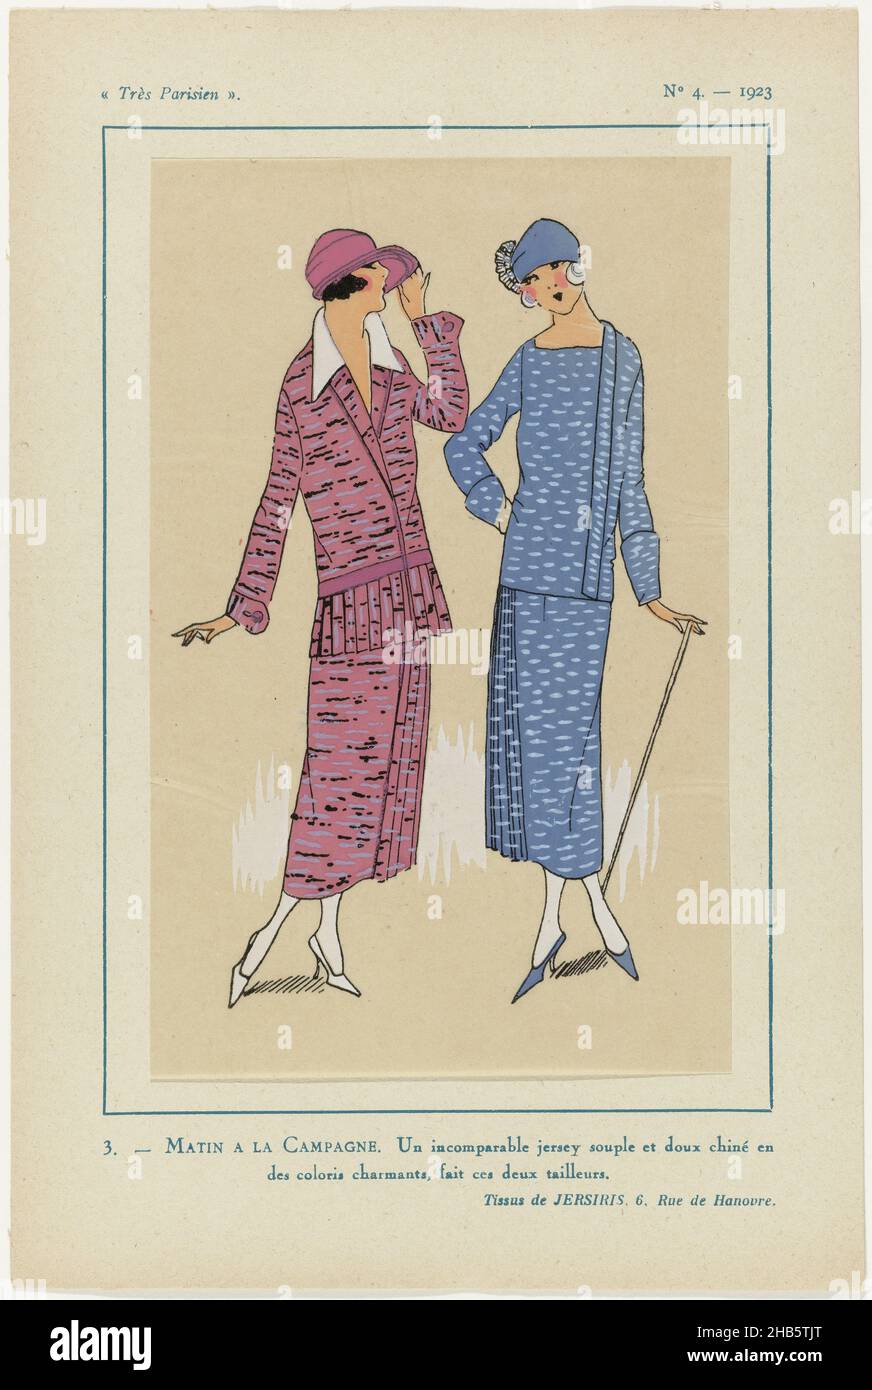 Très Parisien, 1923, No. 4: 3. - MATIN A LA CAMPAGNE..., Fabrics of Jersiris. Two tailleurs (coat suits) made of a unique supple and speckled jersey in charming colors. Print from the fashion magazine Très Parisien (1920-1936)., print maker: anonymous, Jersiris (mentioned on object), Paris, 1923, paper, letterpress printing, height 269 mm × width 180 mm Stock Photo